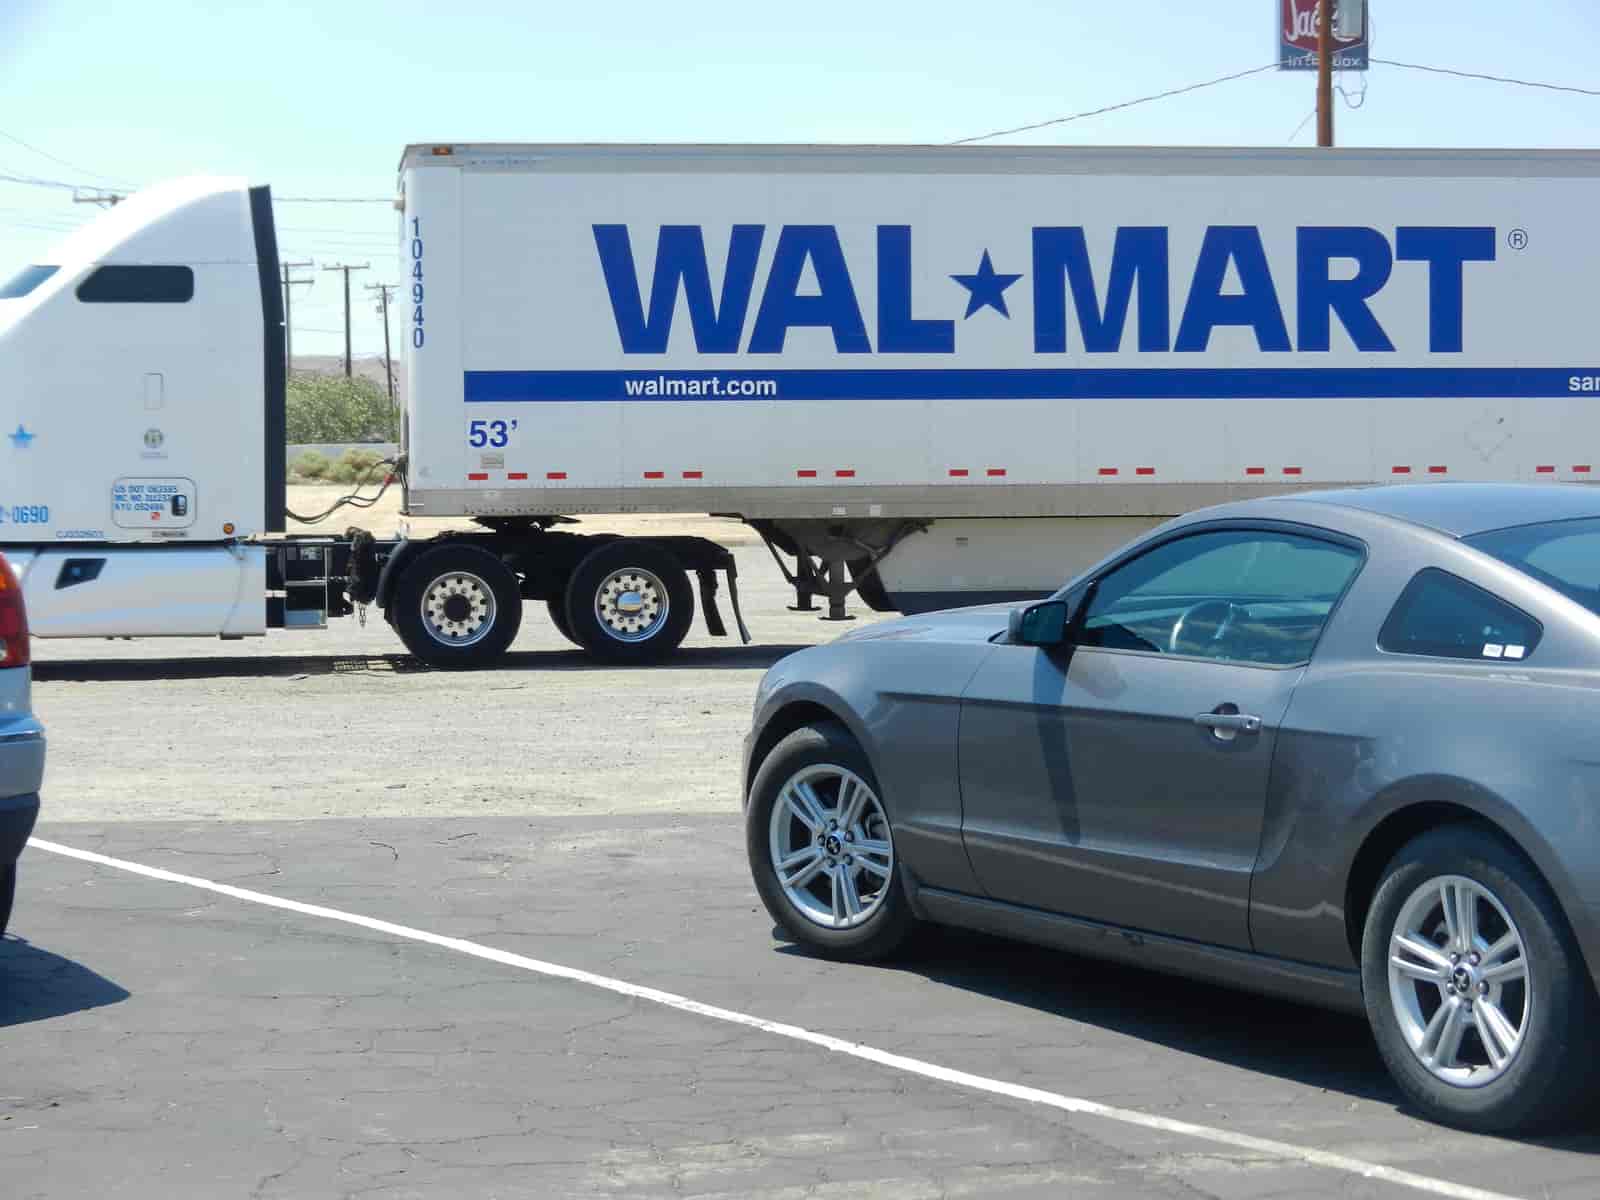 How Long Can You Leave Your Car In A Walmart Parking Lot?